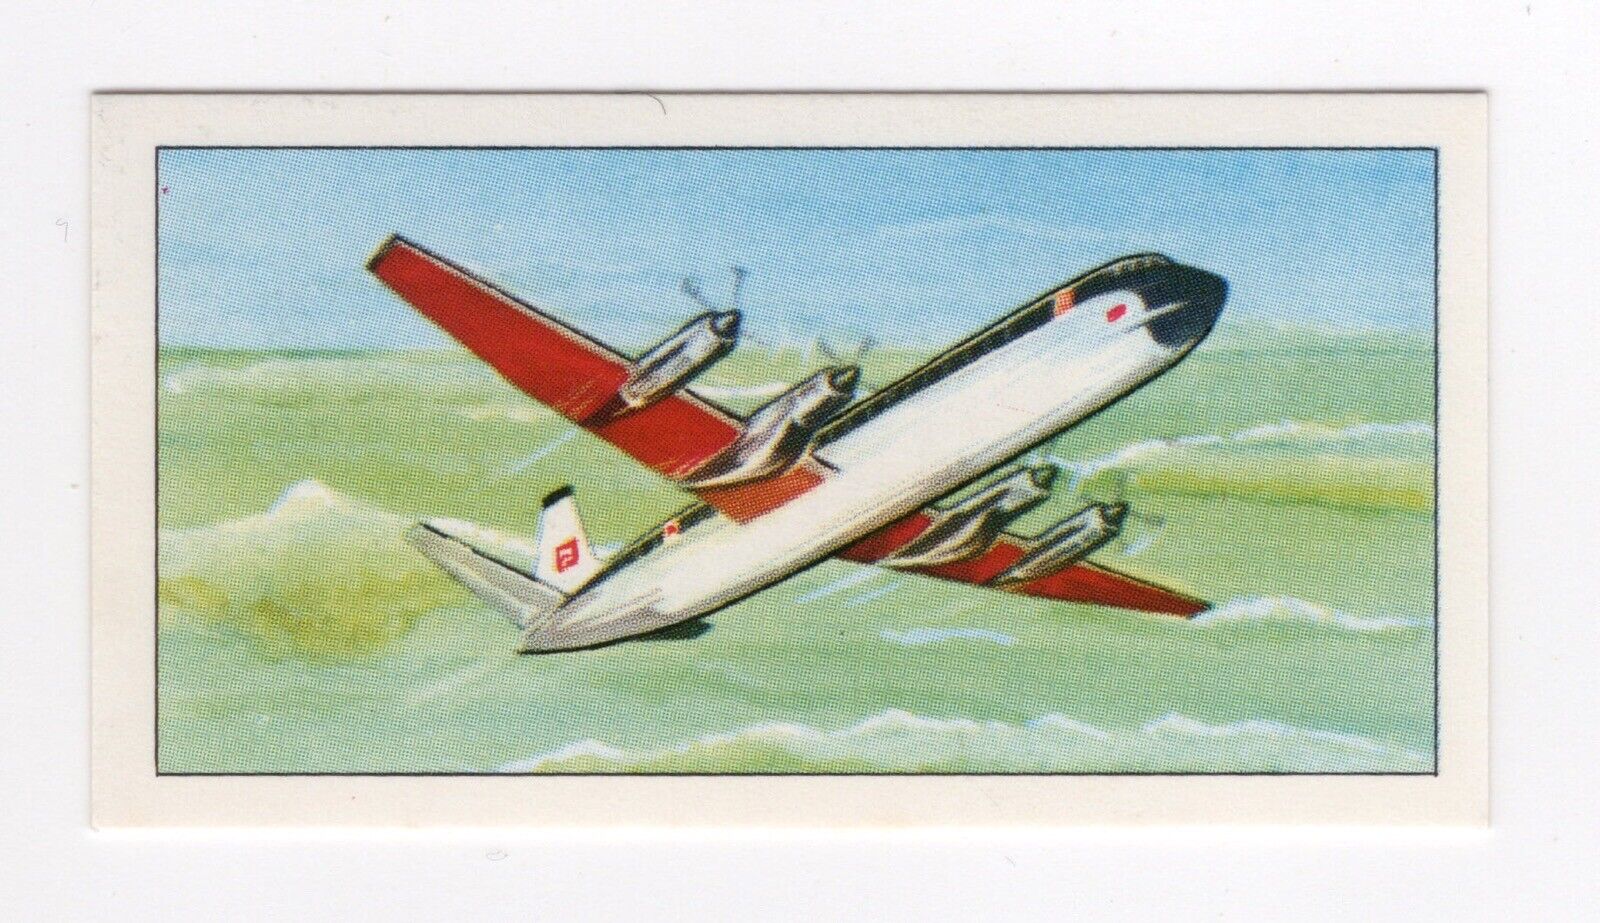 International Air-Liners Card 1956 BEA Vickers Armstrong Vanguard 951